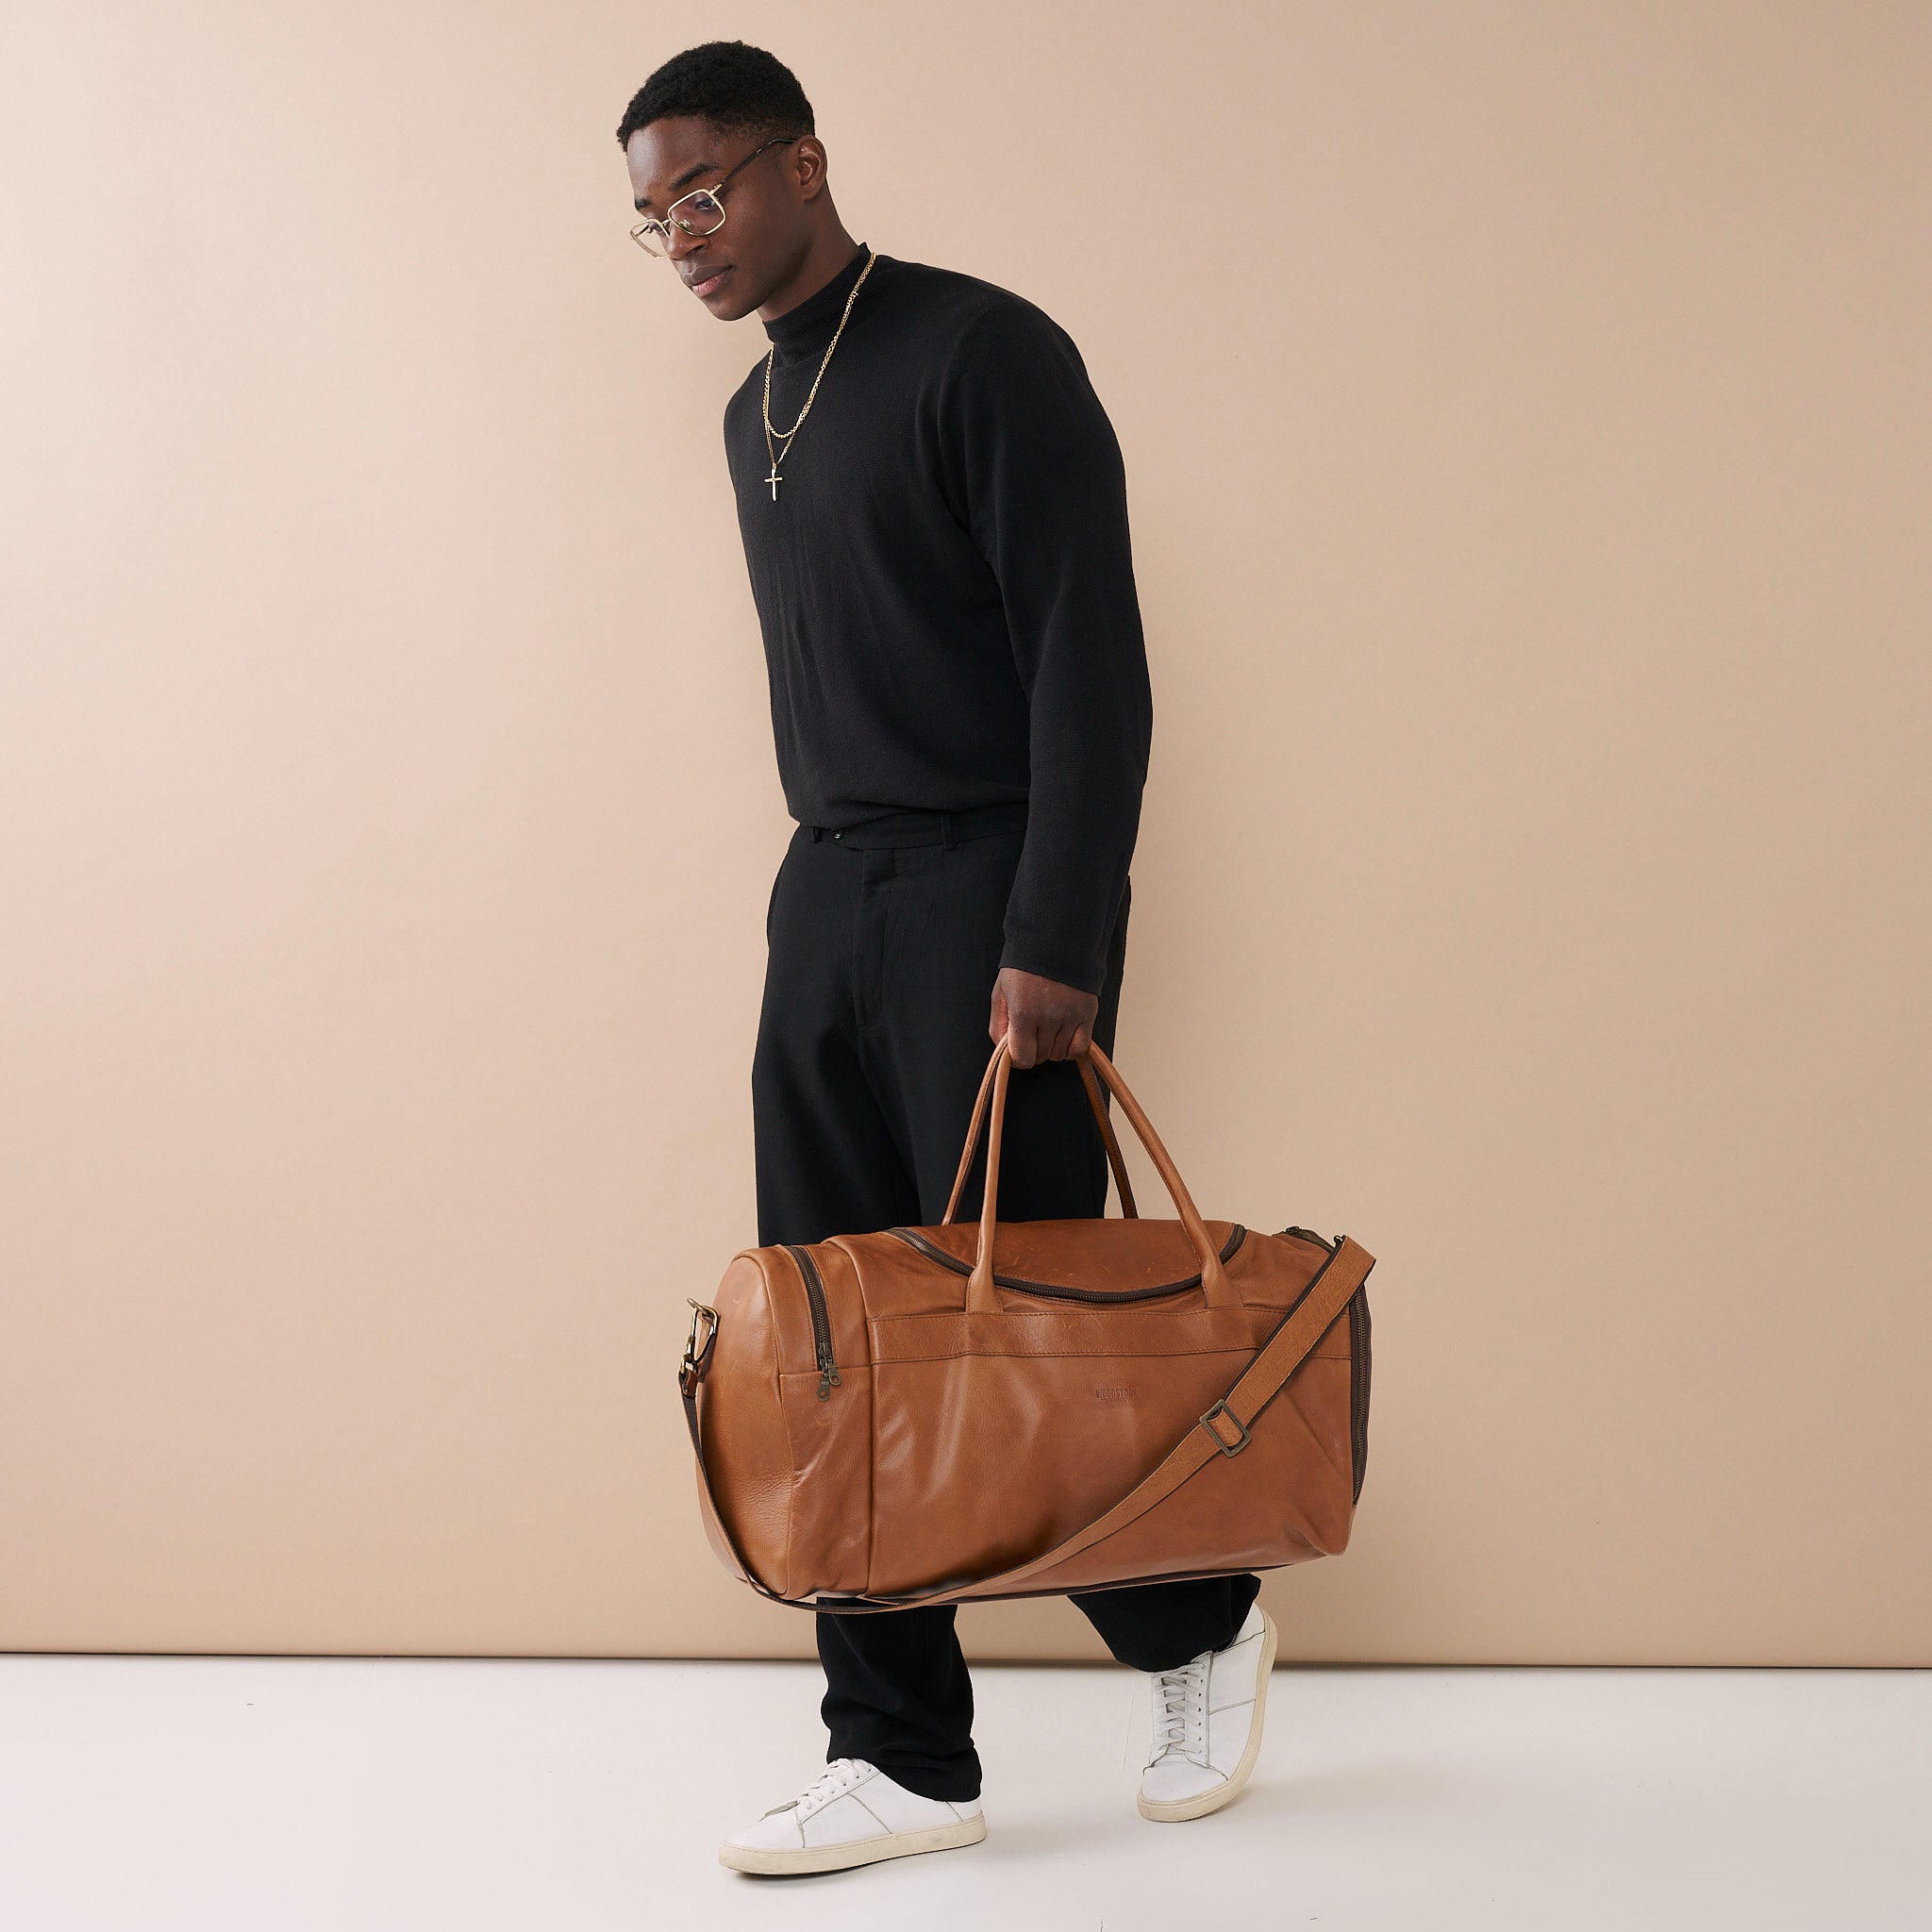 Model holding Pecan Genuine Leather Sports Duffel Bag with Waterproof Lining &amp; Sneaker Compartment